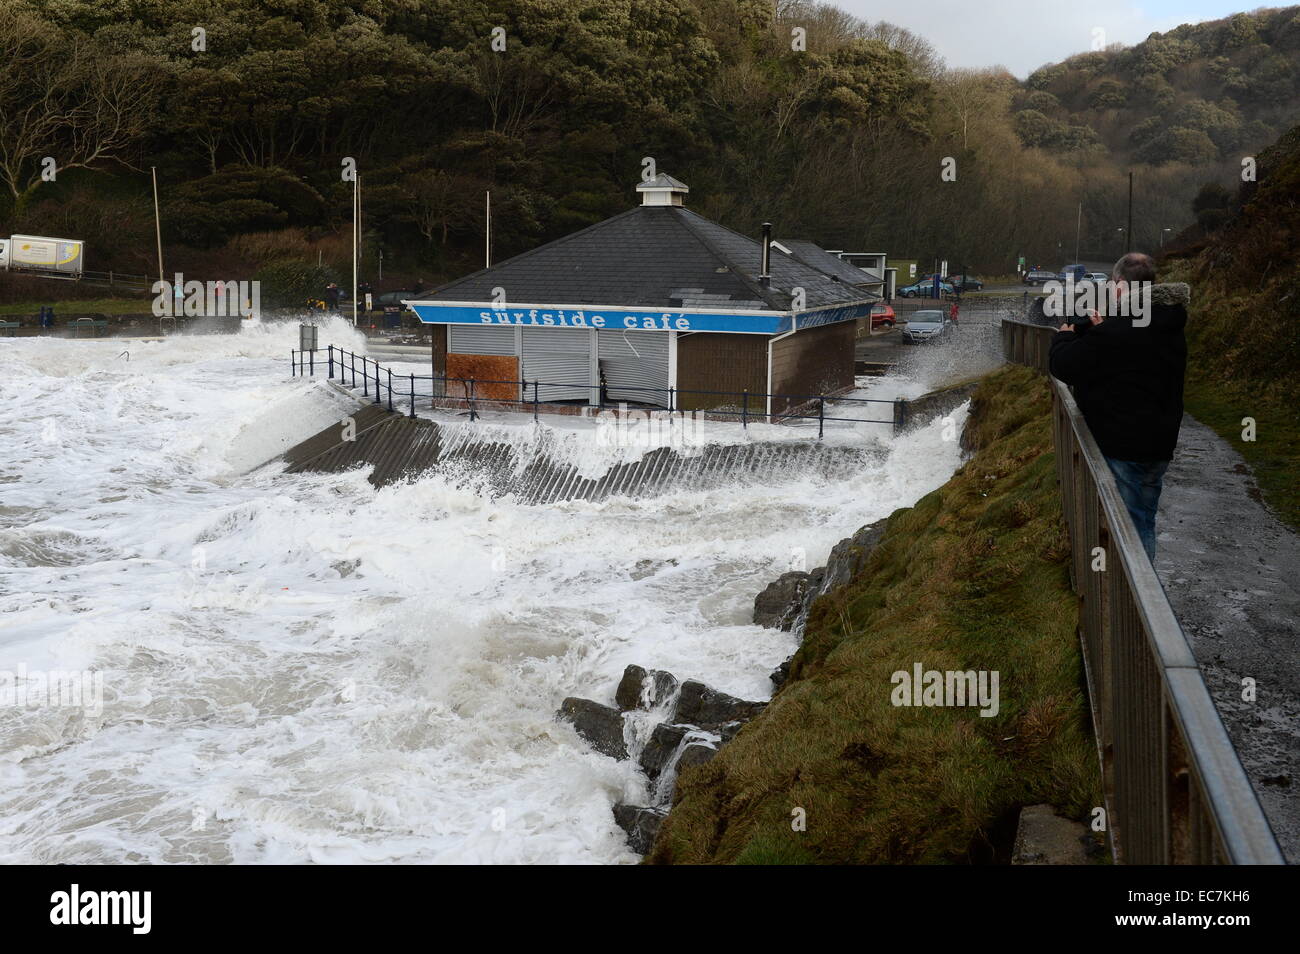 large  waves break over the sea defenses swirling  round the Surfside Cafe  at Caswell Bay  breaking shutters damaging  inside Stock Photo